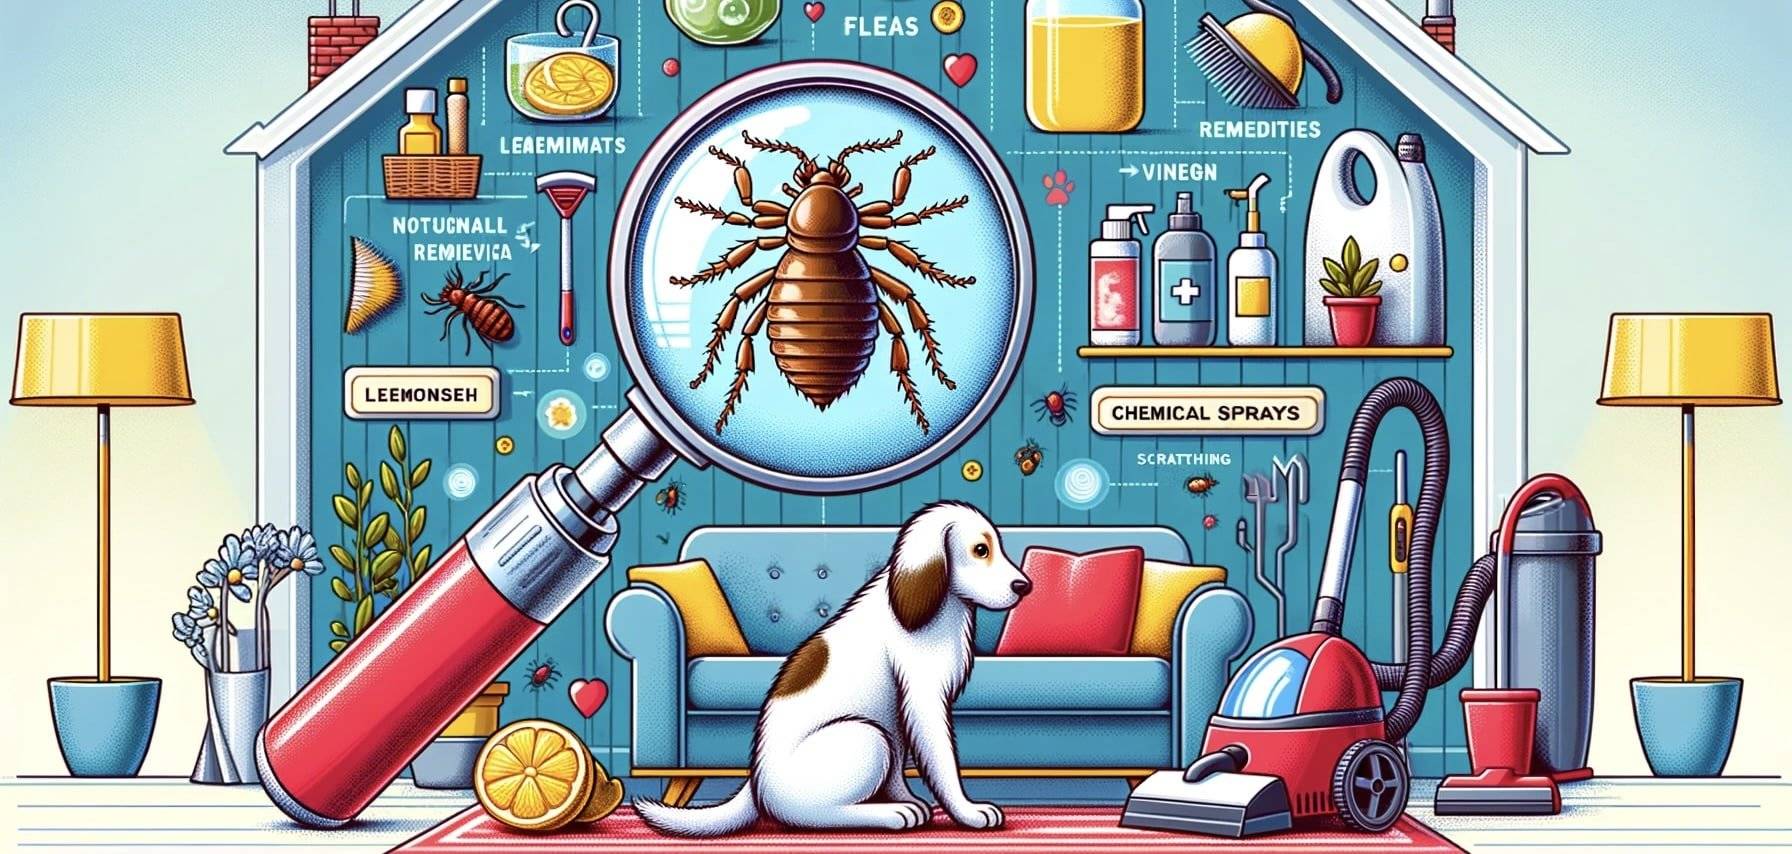 How do you get rid of fleas in your house fast